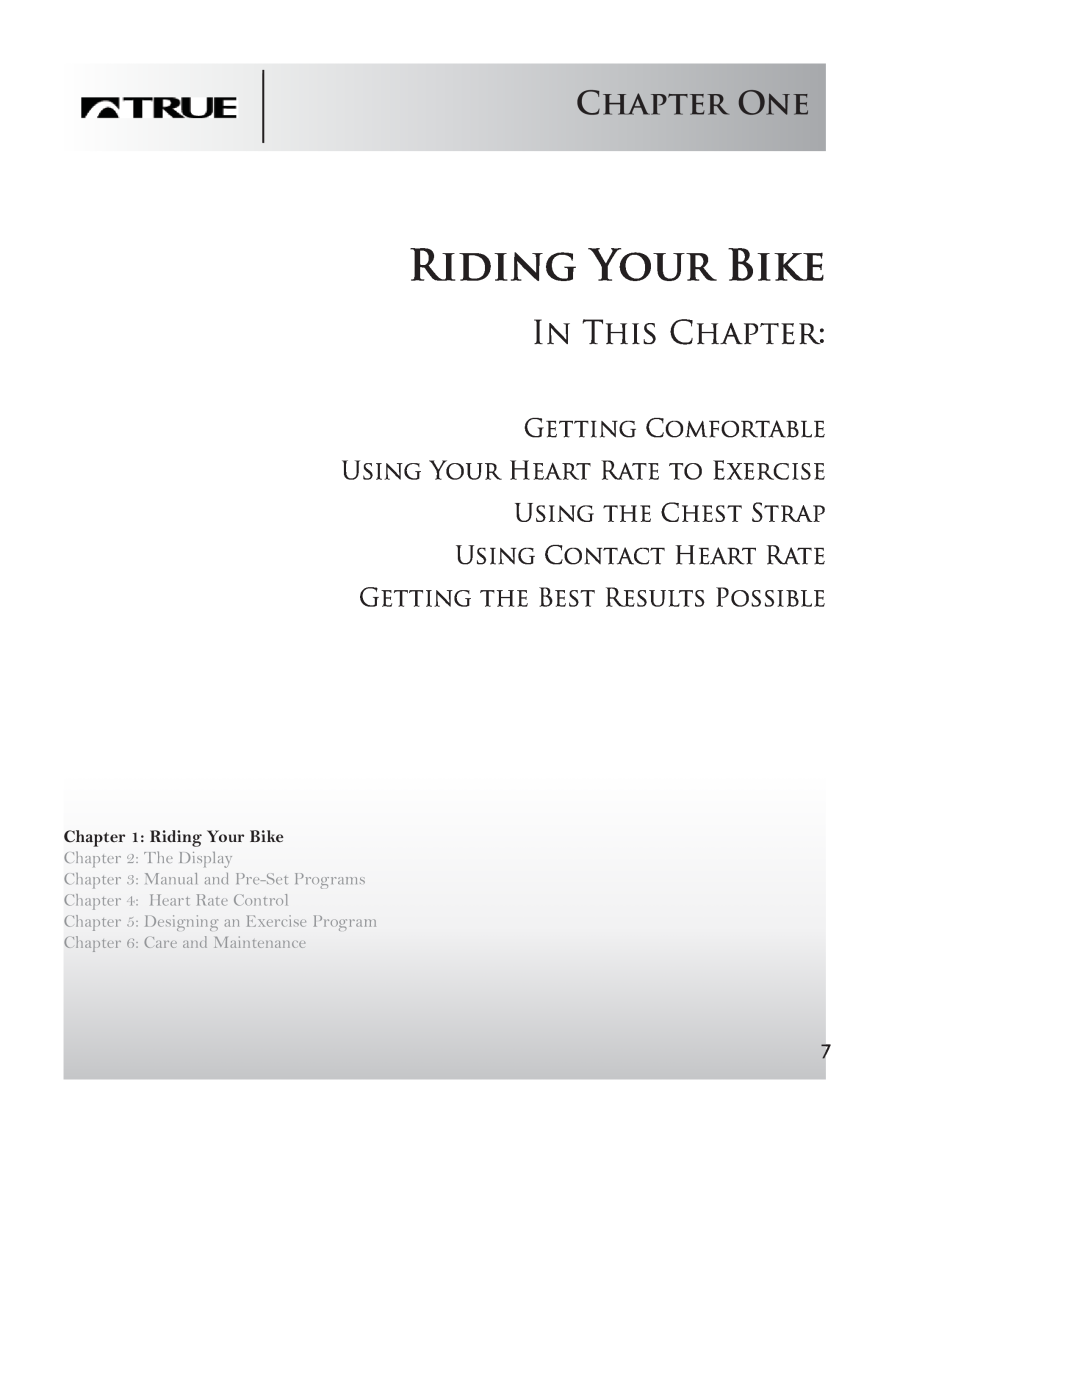 True Fitness PS50 Riding Your Bike, Chapter One, In This Chapter, Getting Comfortable Using Your Heart Rate to Exercise 